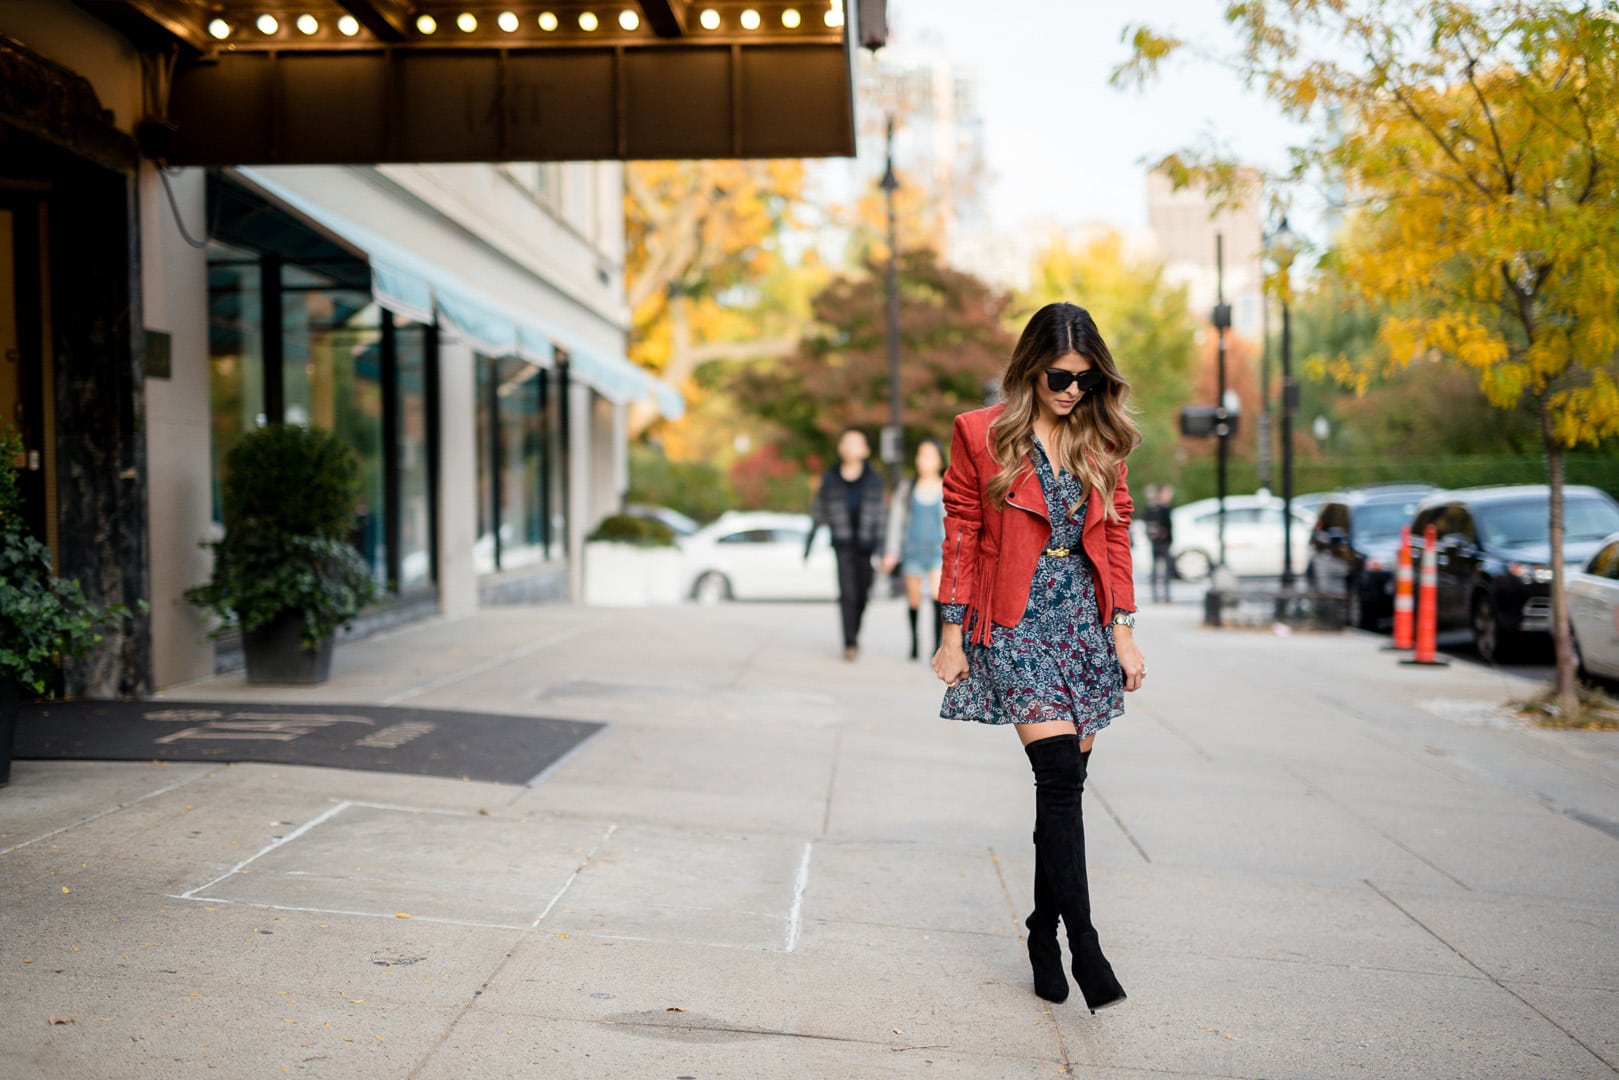 Pam Hetlinger wearing a suede fringed jacket, floral dress and Delman over-the-knee boots